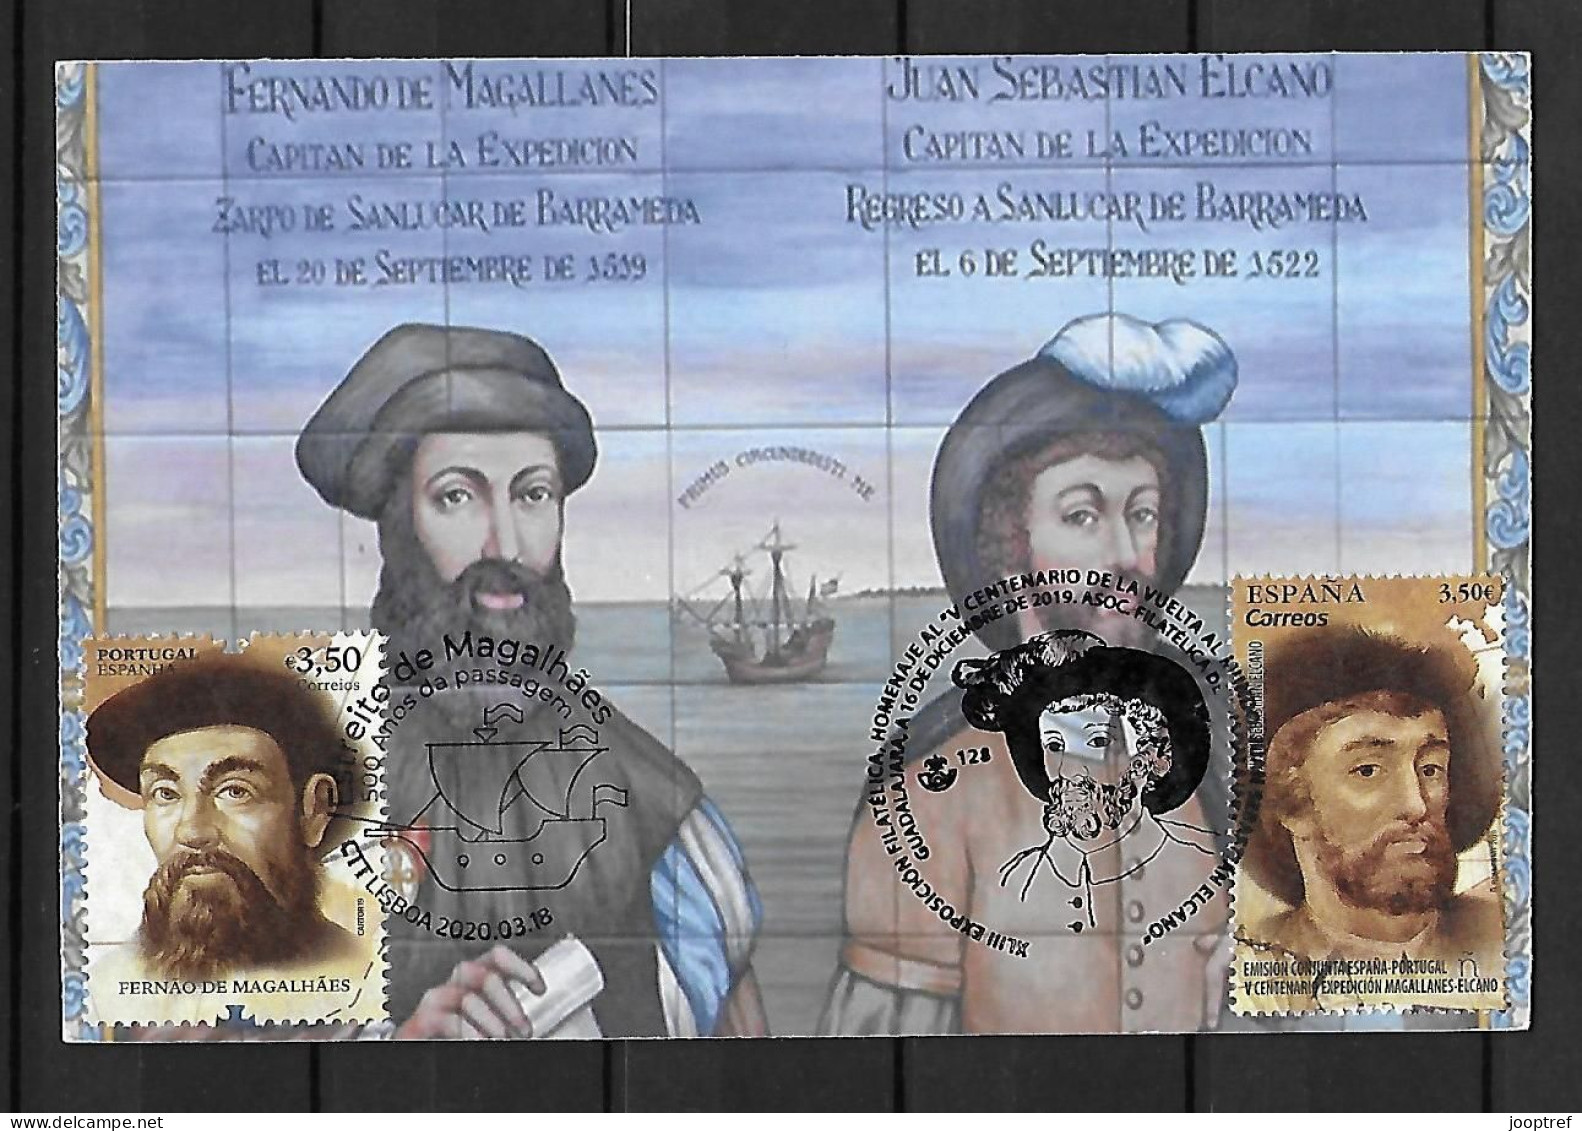 2019 Joint Portugal And Spain, MIXED FDC MAXIMUM CARD WITH BOTH STAMPS: 500 Years Magellan-Elcano Expedition - Gemeinschaftsausgaben